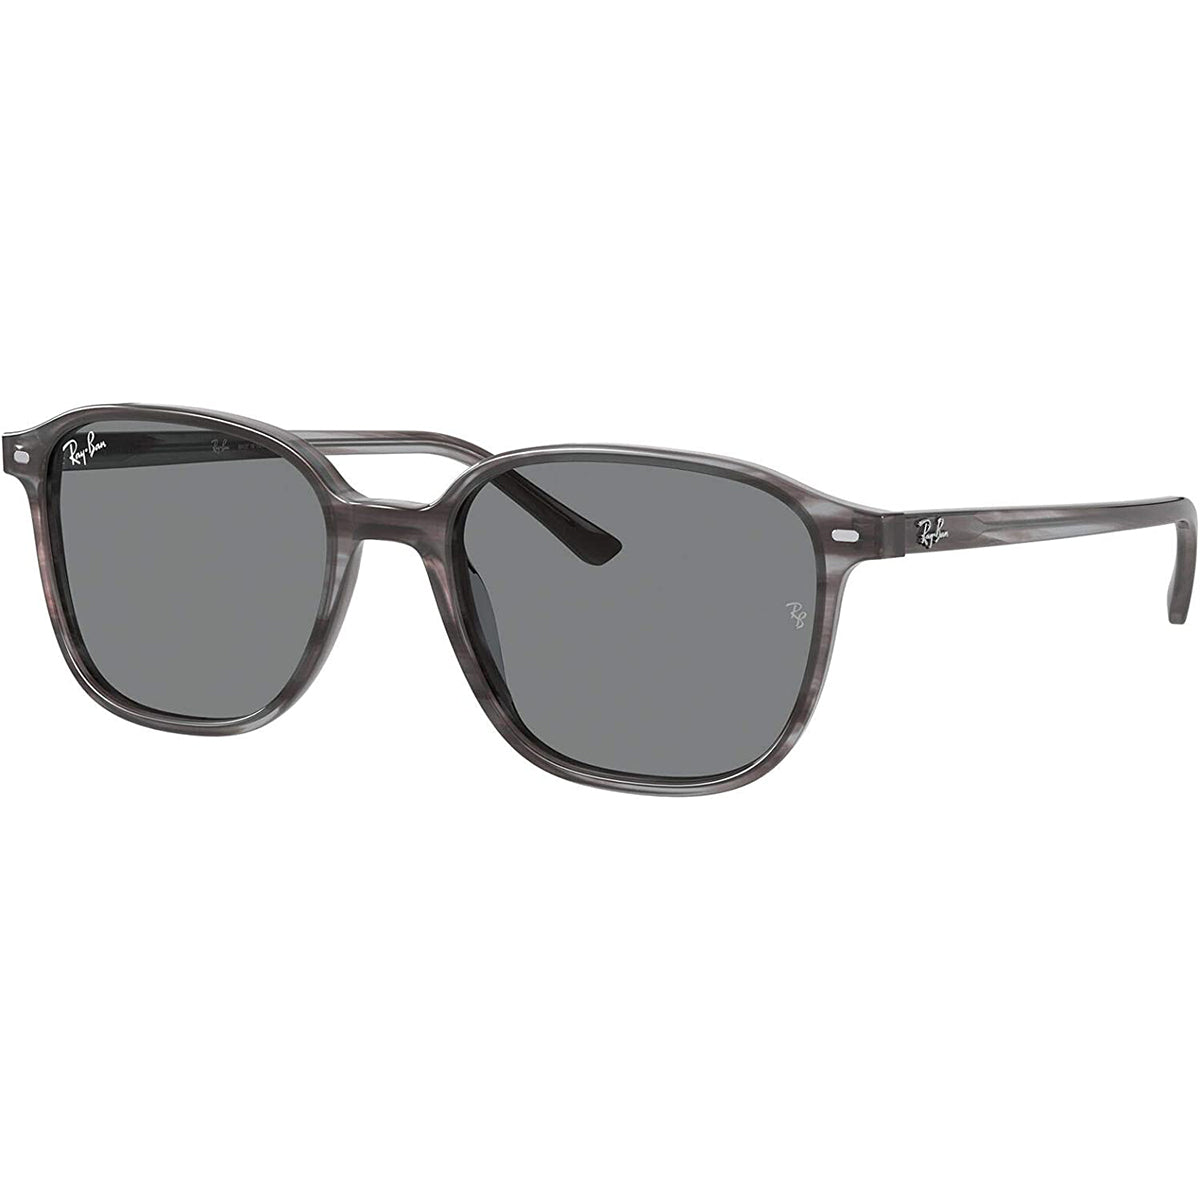 Ray-Ban Clubmaster Square Adult Lifestyle Sunglasses (Brand New) –  Motorhelmets.com | Shop for Moto Gear